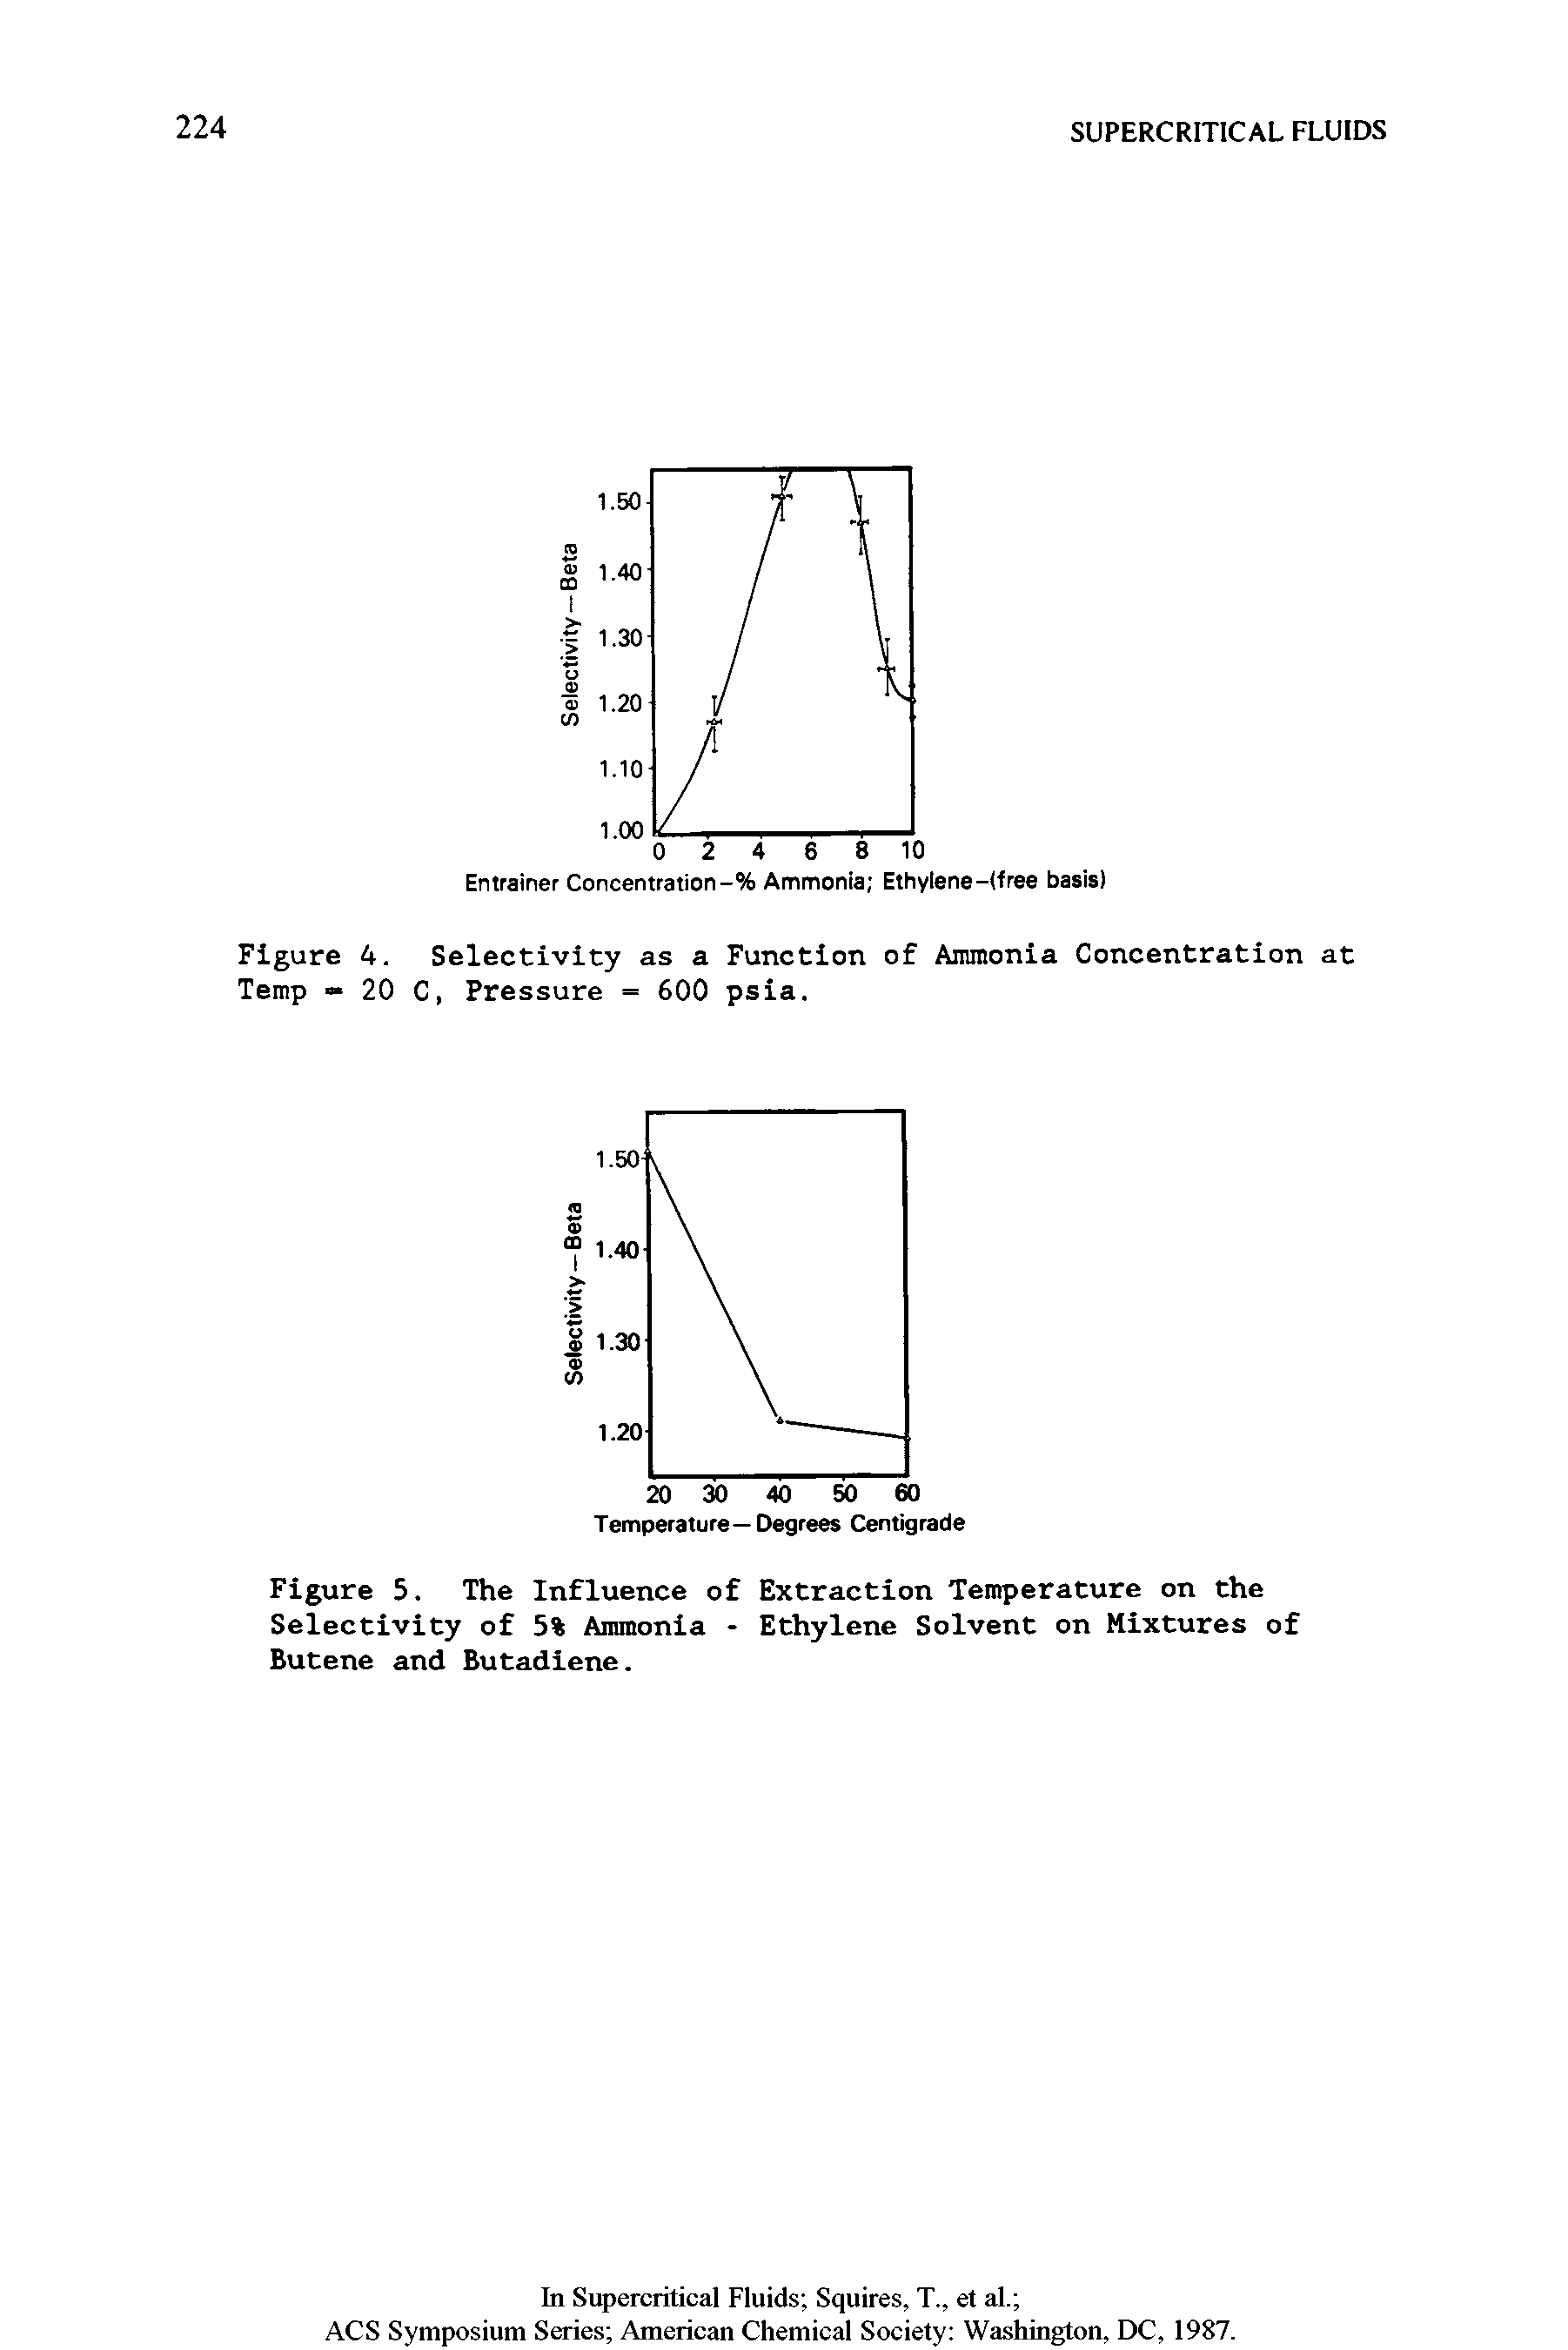 Figure 5. The Influence of Extraction Temperature on the Selectivity of 5% Ammonia - Ethylene Solvent on Mixtures of Butene and Butadiene.